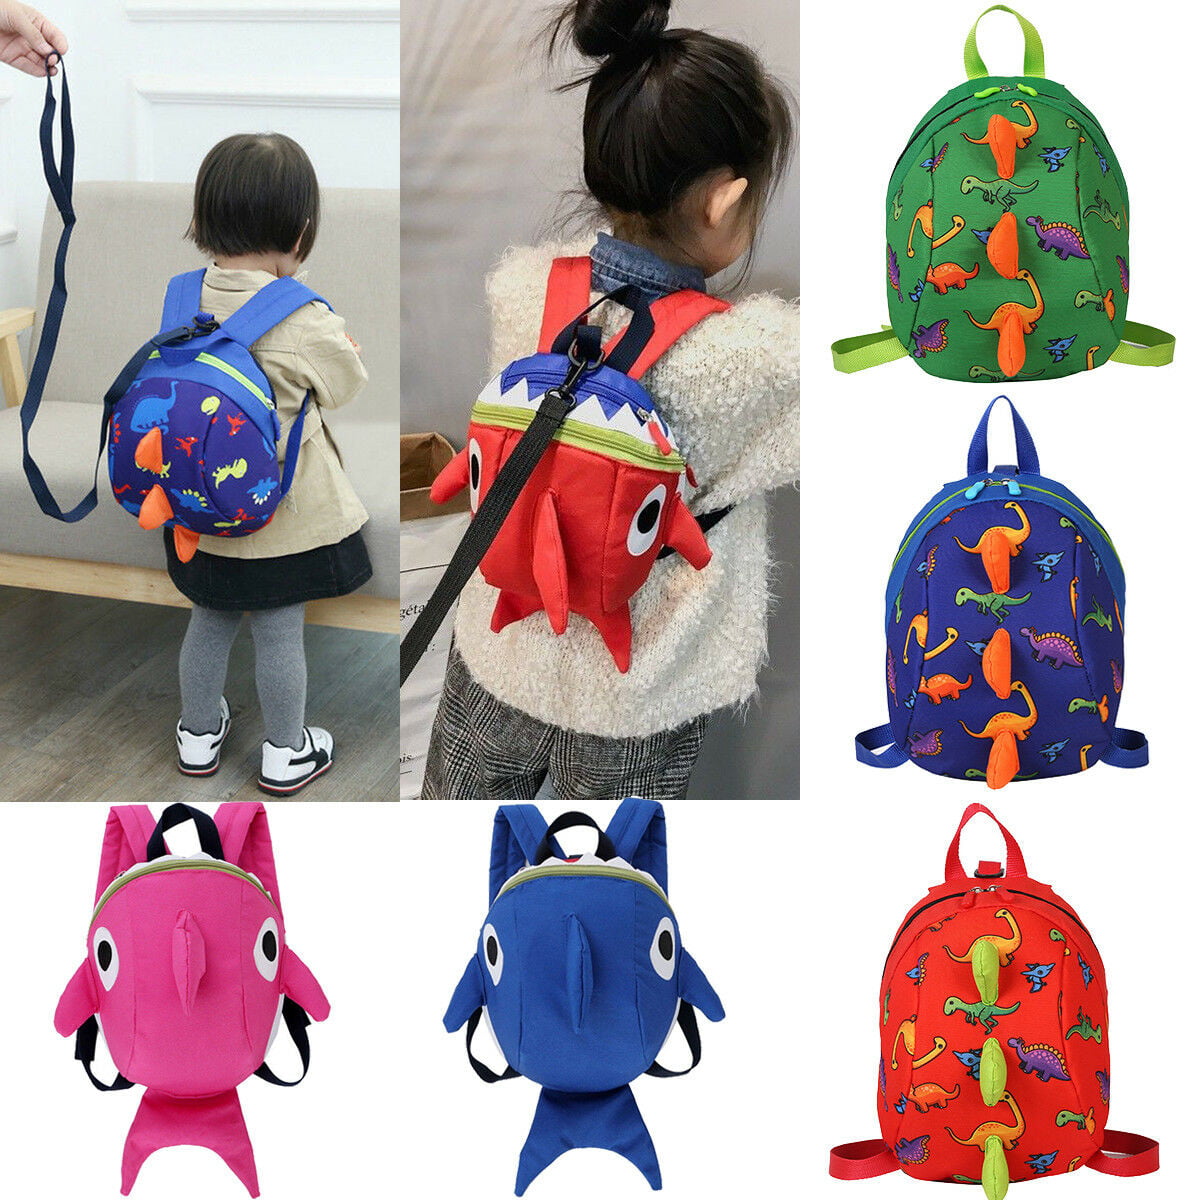 School Backpack Kids Travel Daypack Toddler Mini Backpack with Leash Avoid-Lost Harness Bag for Kids